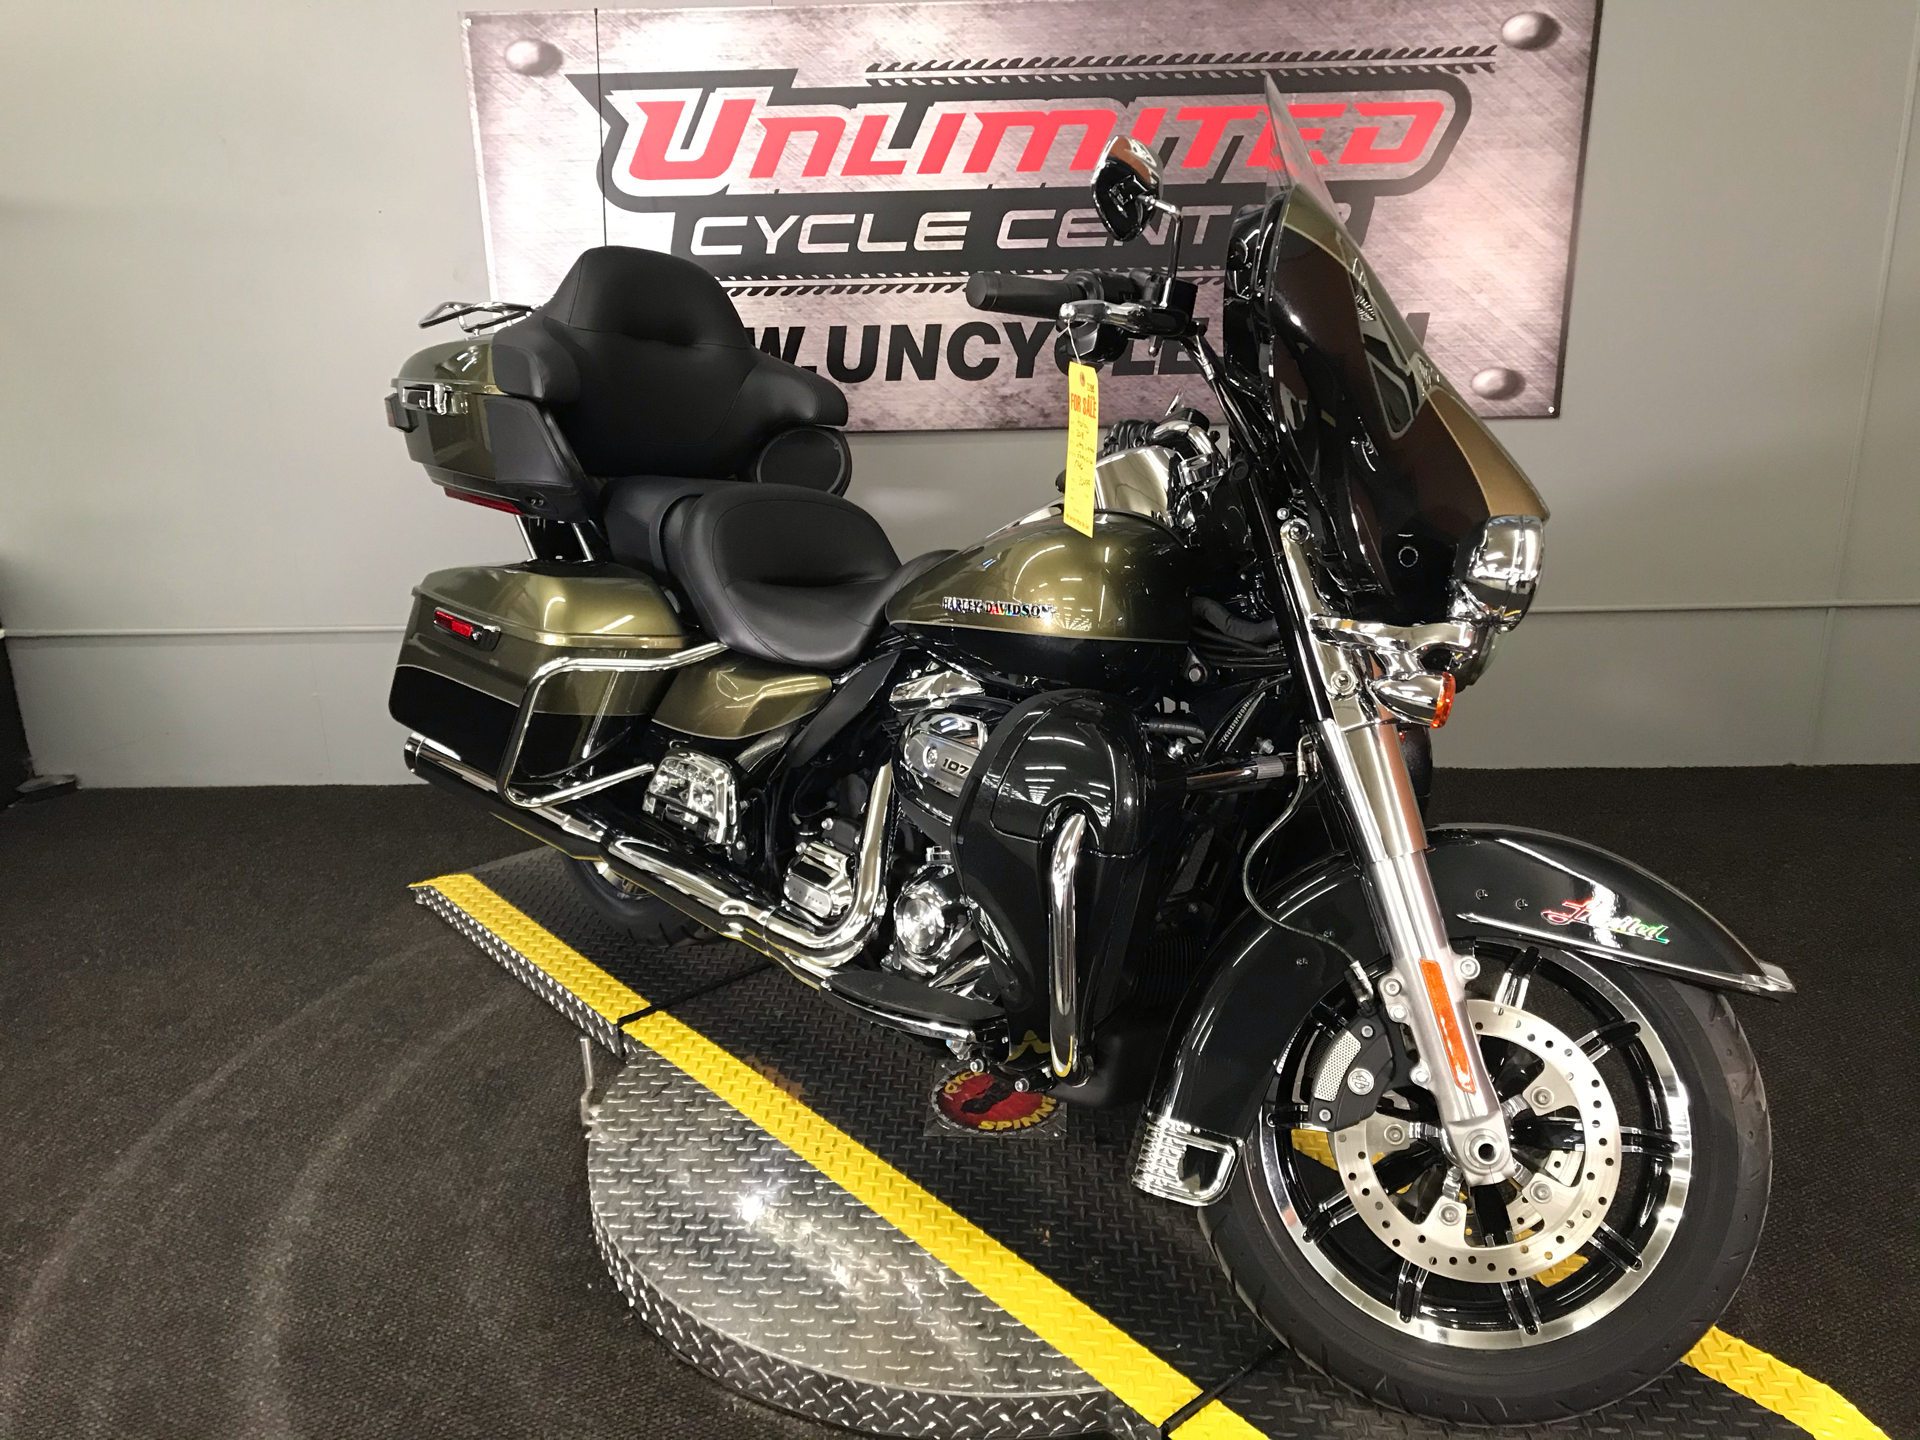 Used 2018 Harley Davidson Ultra Limited Motorcycles In Tyrone Pa 684257 Olive Gold Black Tempest